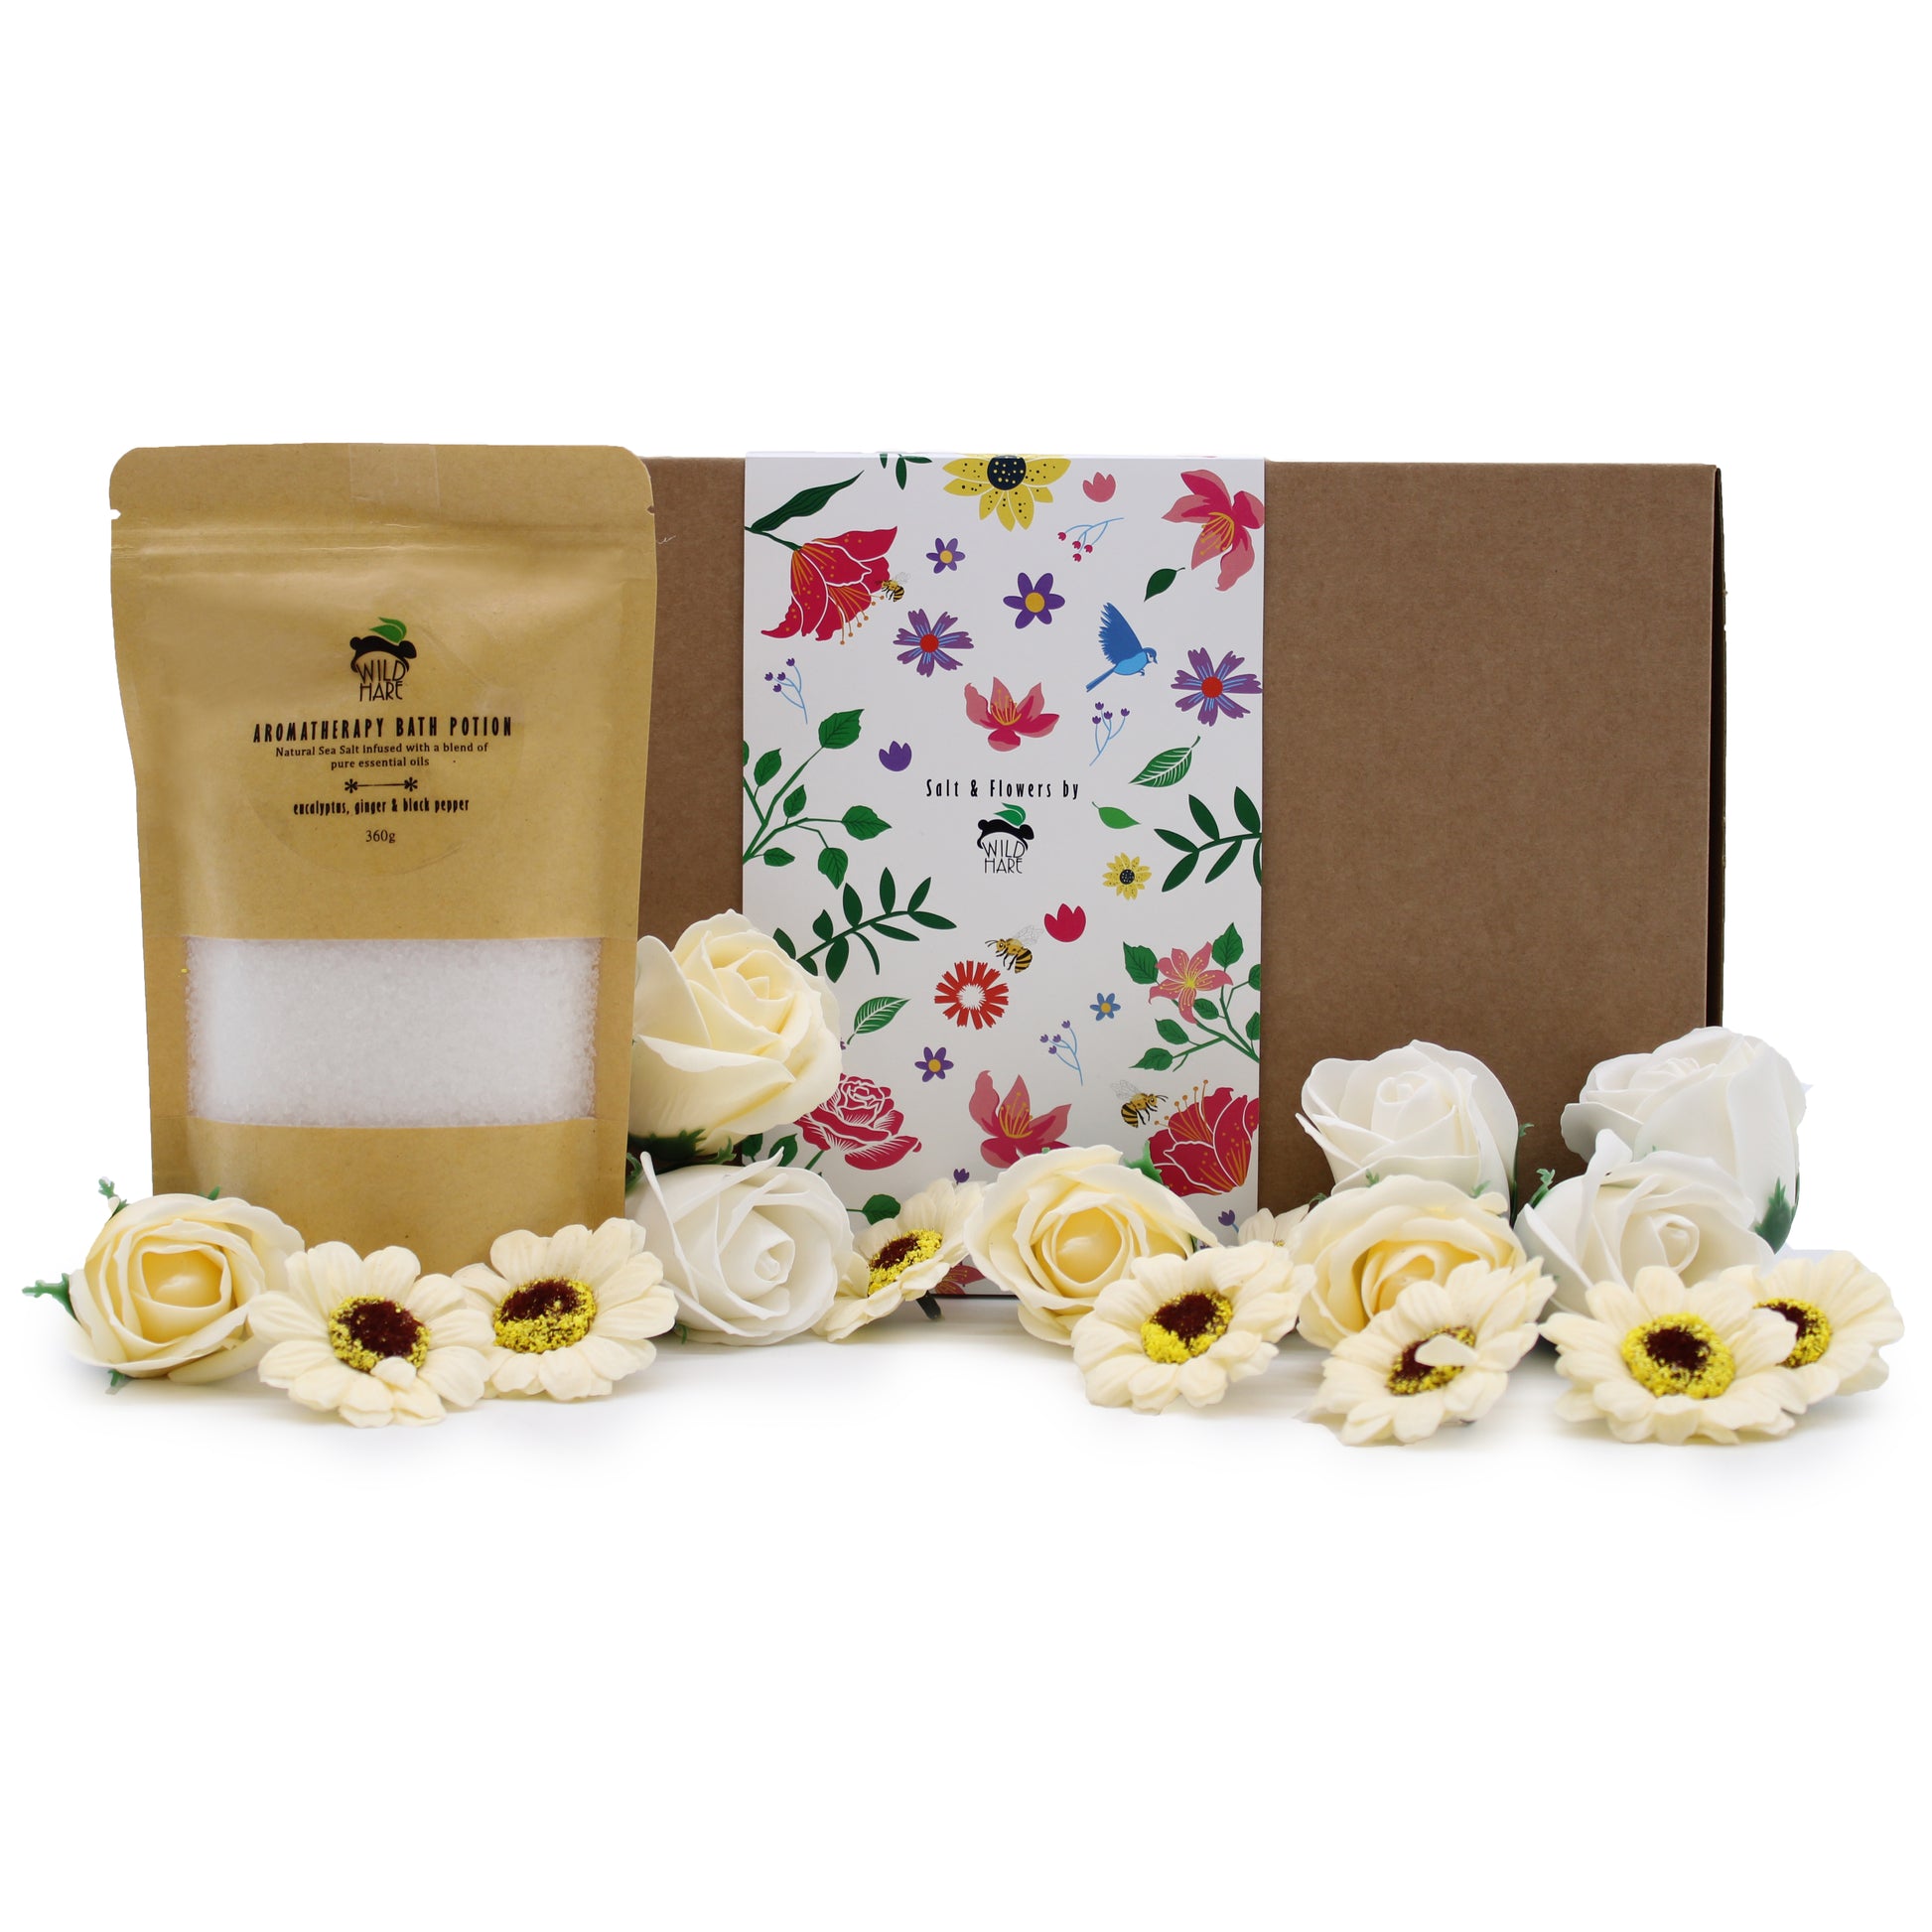 A mixture of cream and white soap Rose and Germini flowers are shown at the front, behind them on the left is a pale brown container of white bath salts, and at the very back is the cardboard box packaging of the giftset, finished with a white floral banner.